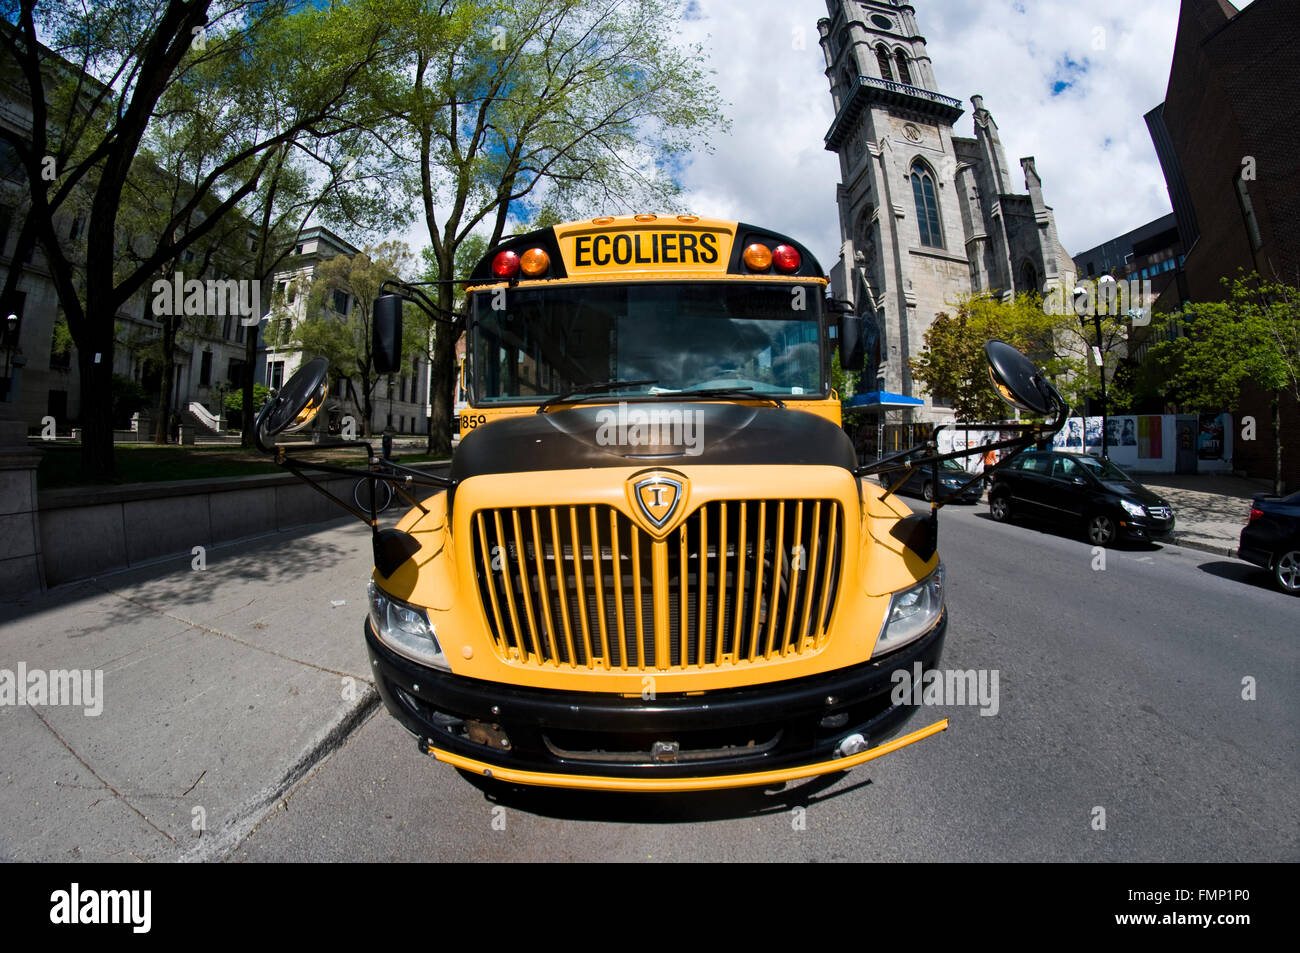 A Canadian school bus Stock Photo